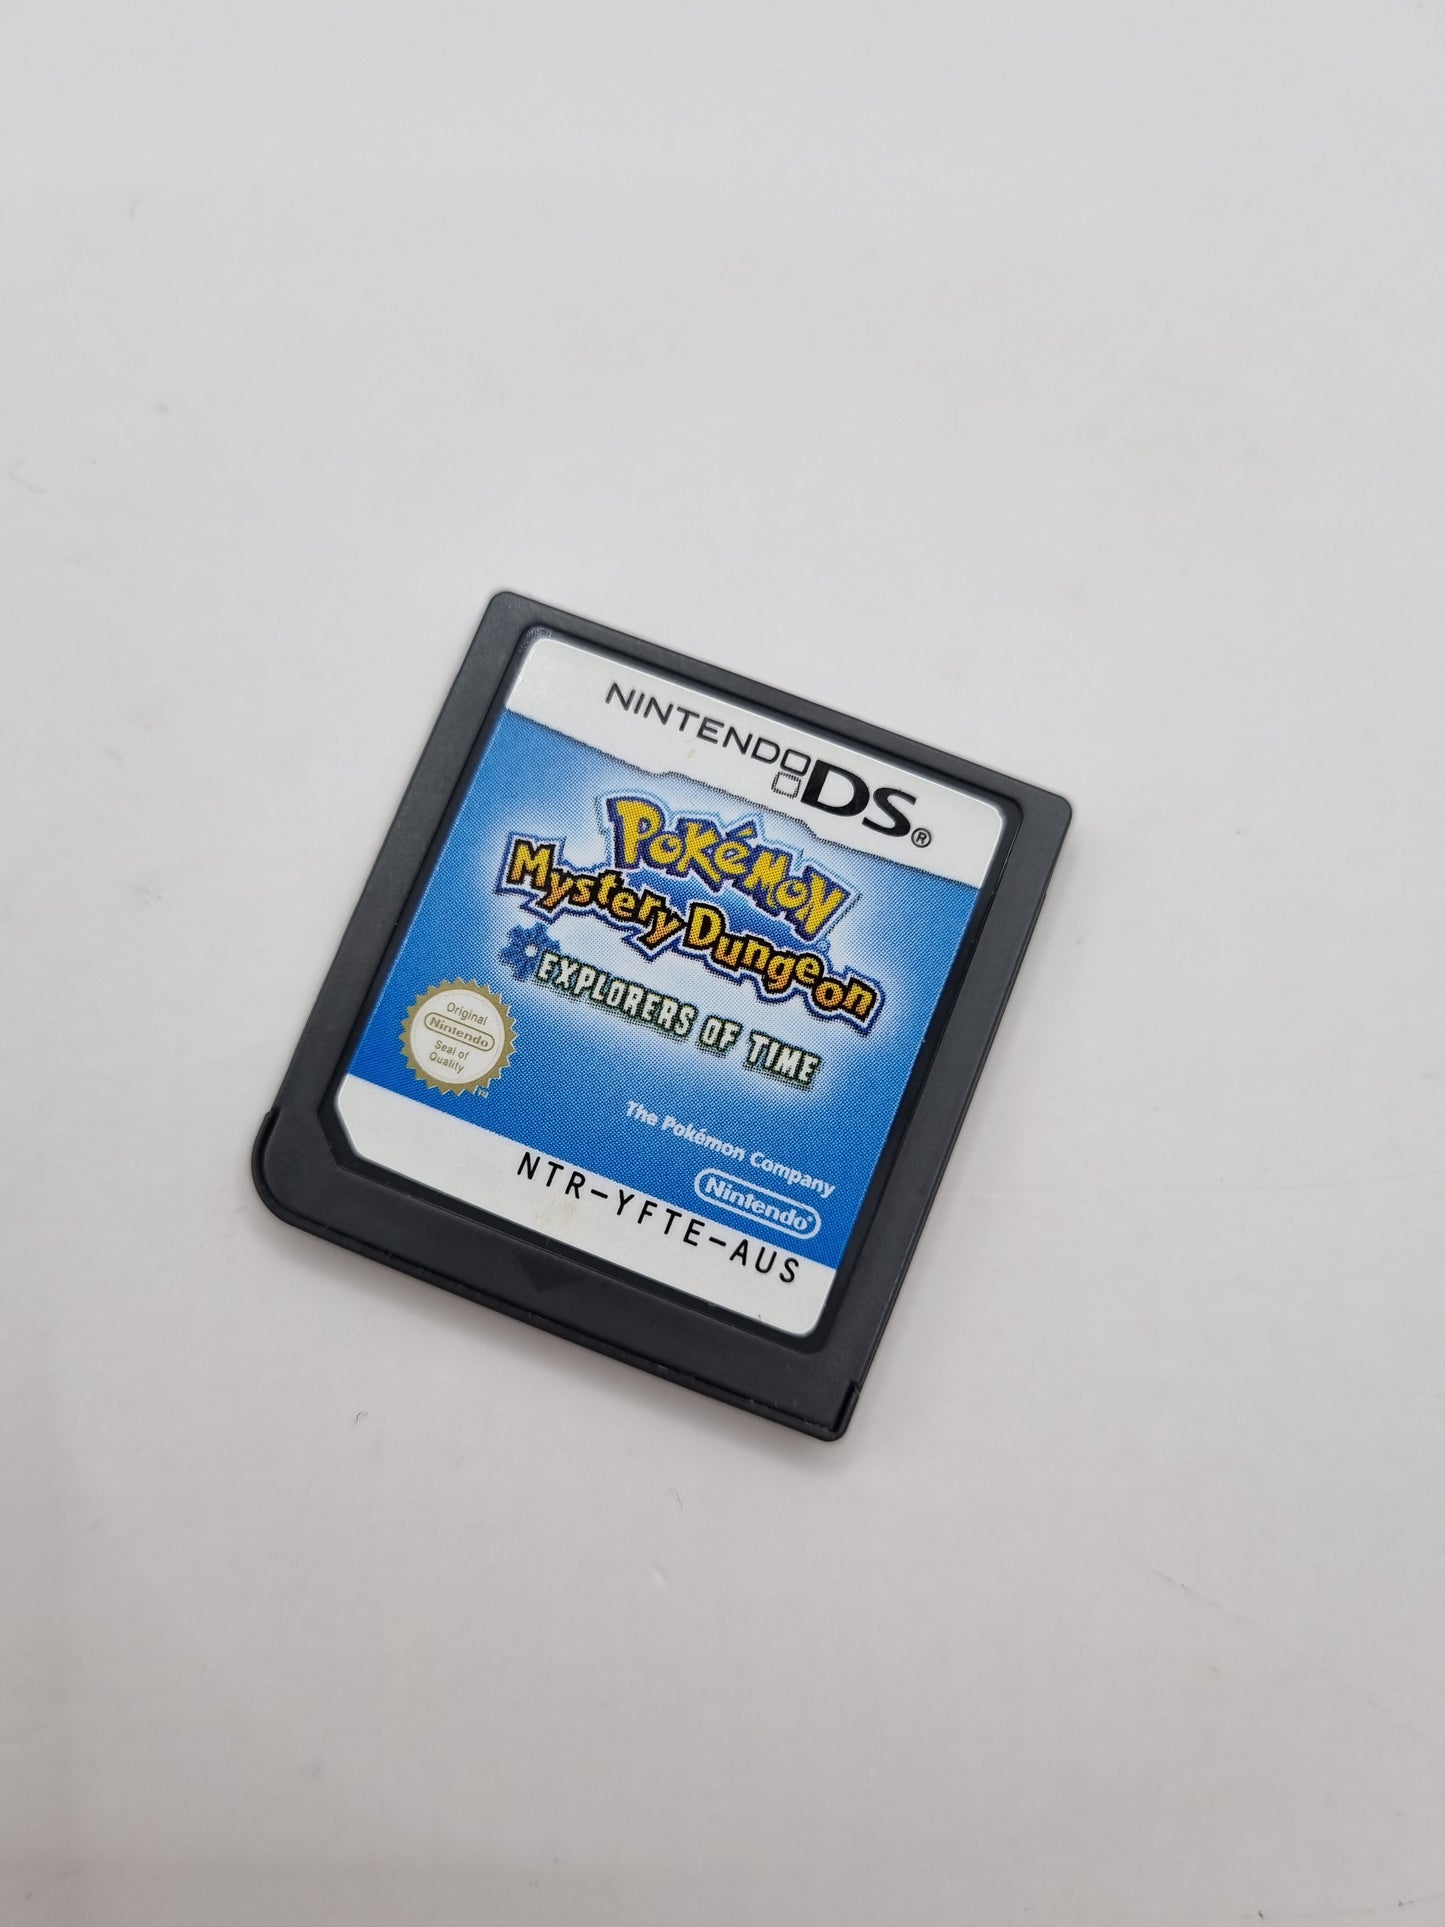 Pokemon Mystery Dungeon Explores Of Time Nintendo DS